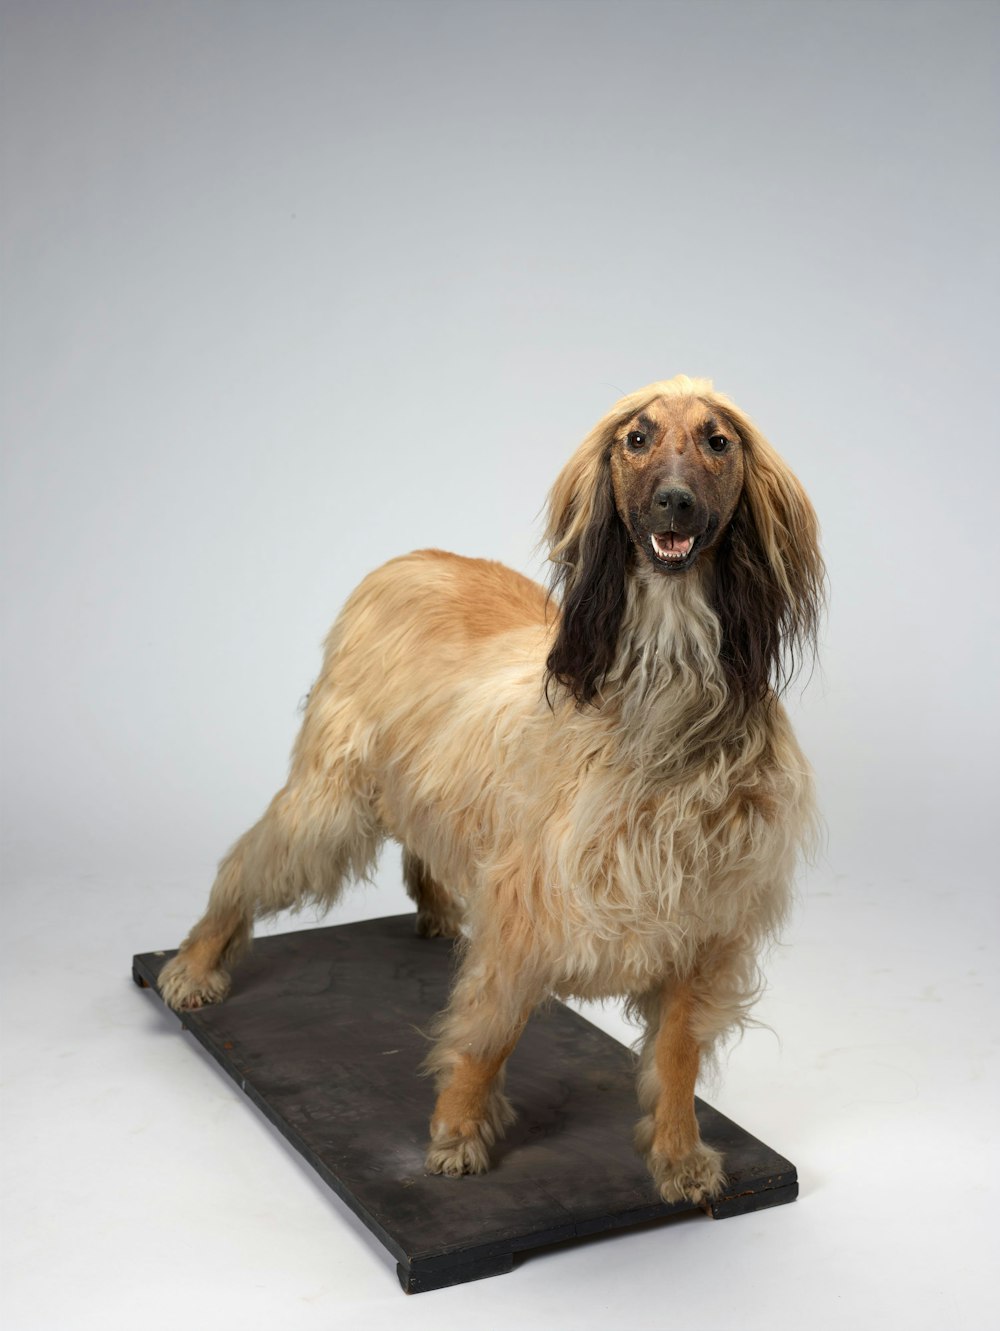 a brown and white dog standing on a black mat